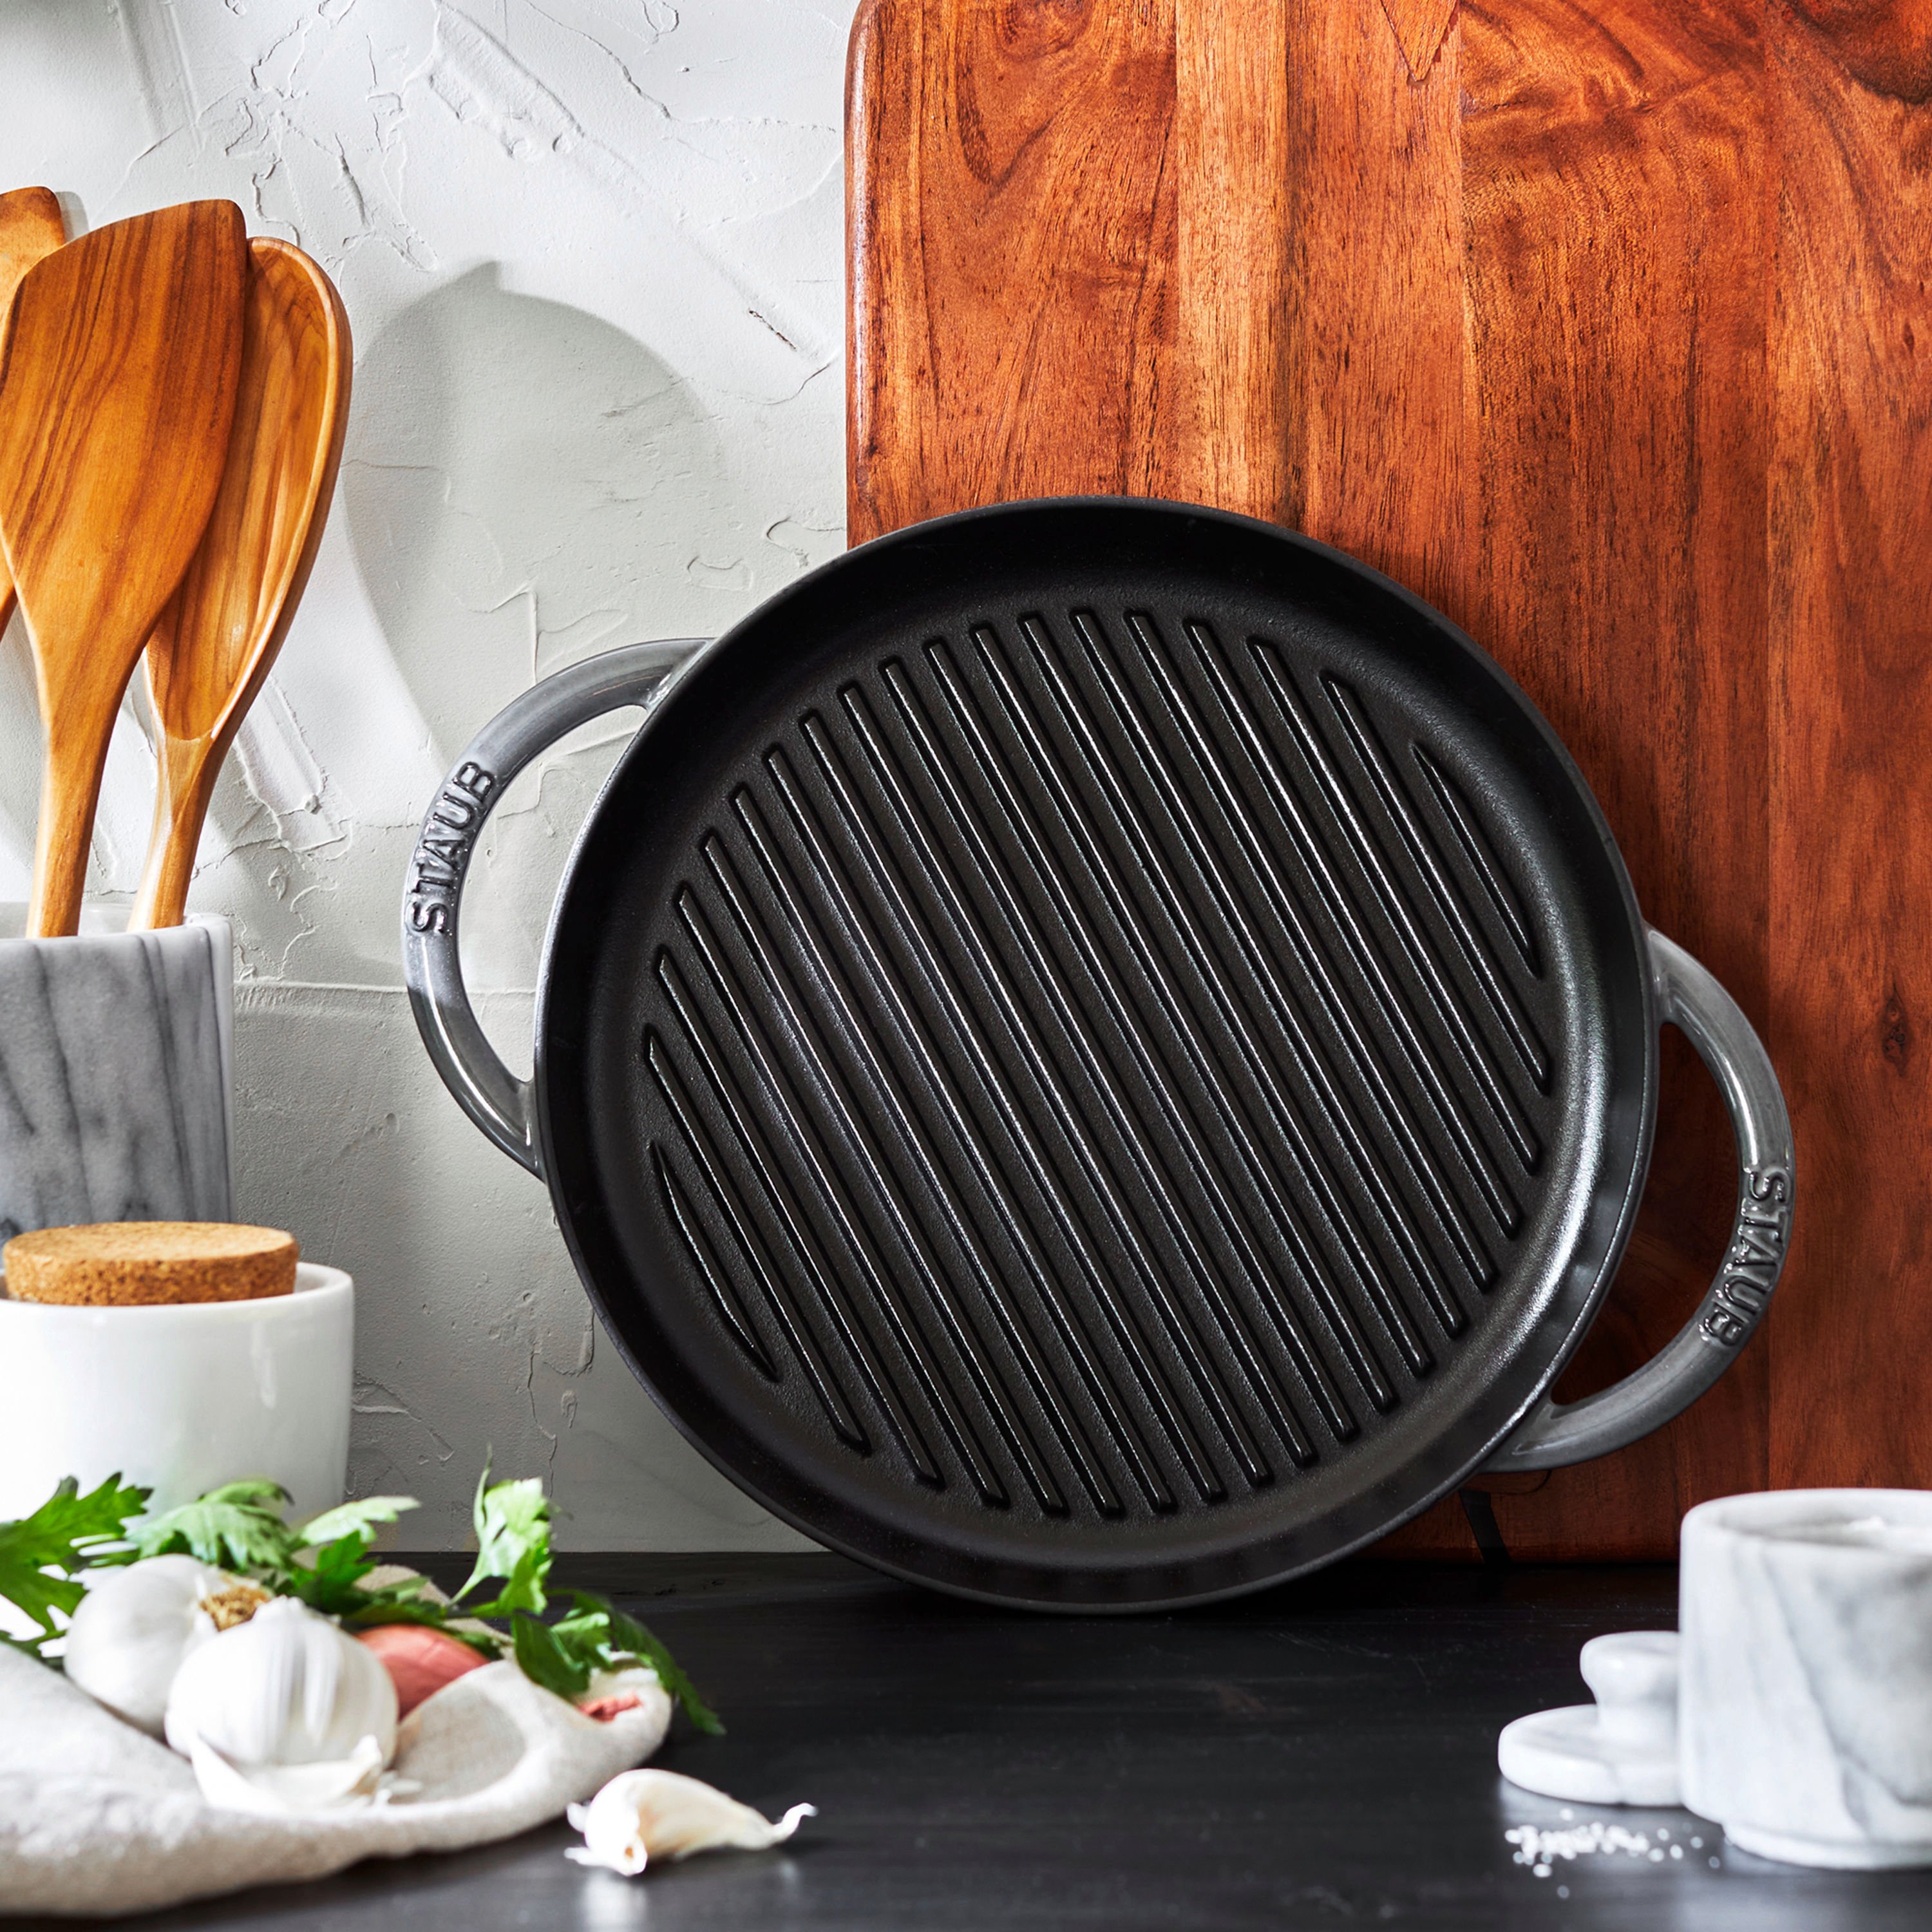 Get the Staub grill pan for 55% off and start making the most tender meats